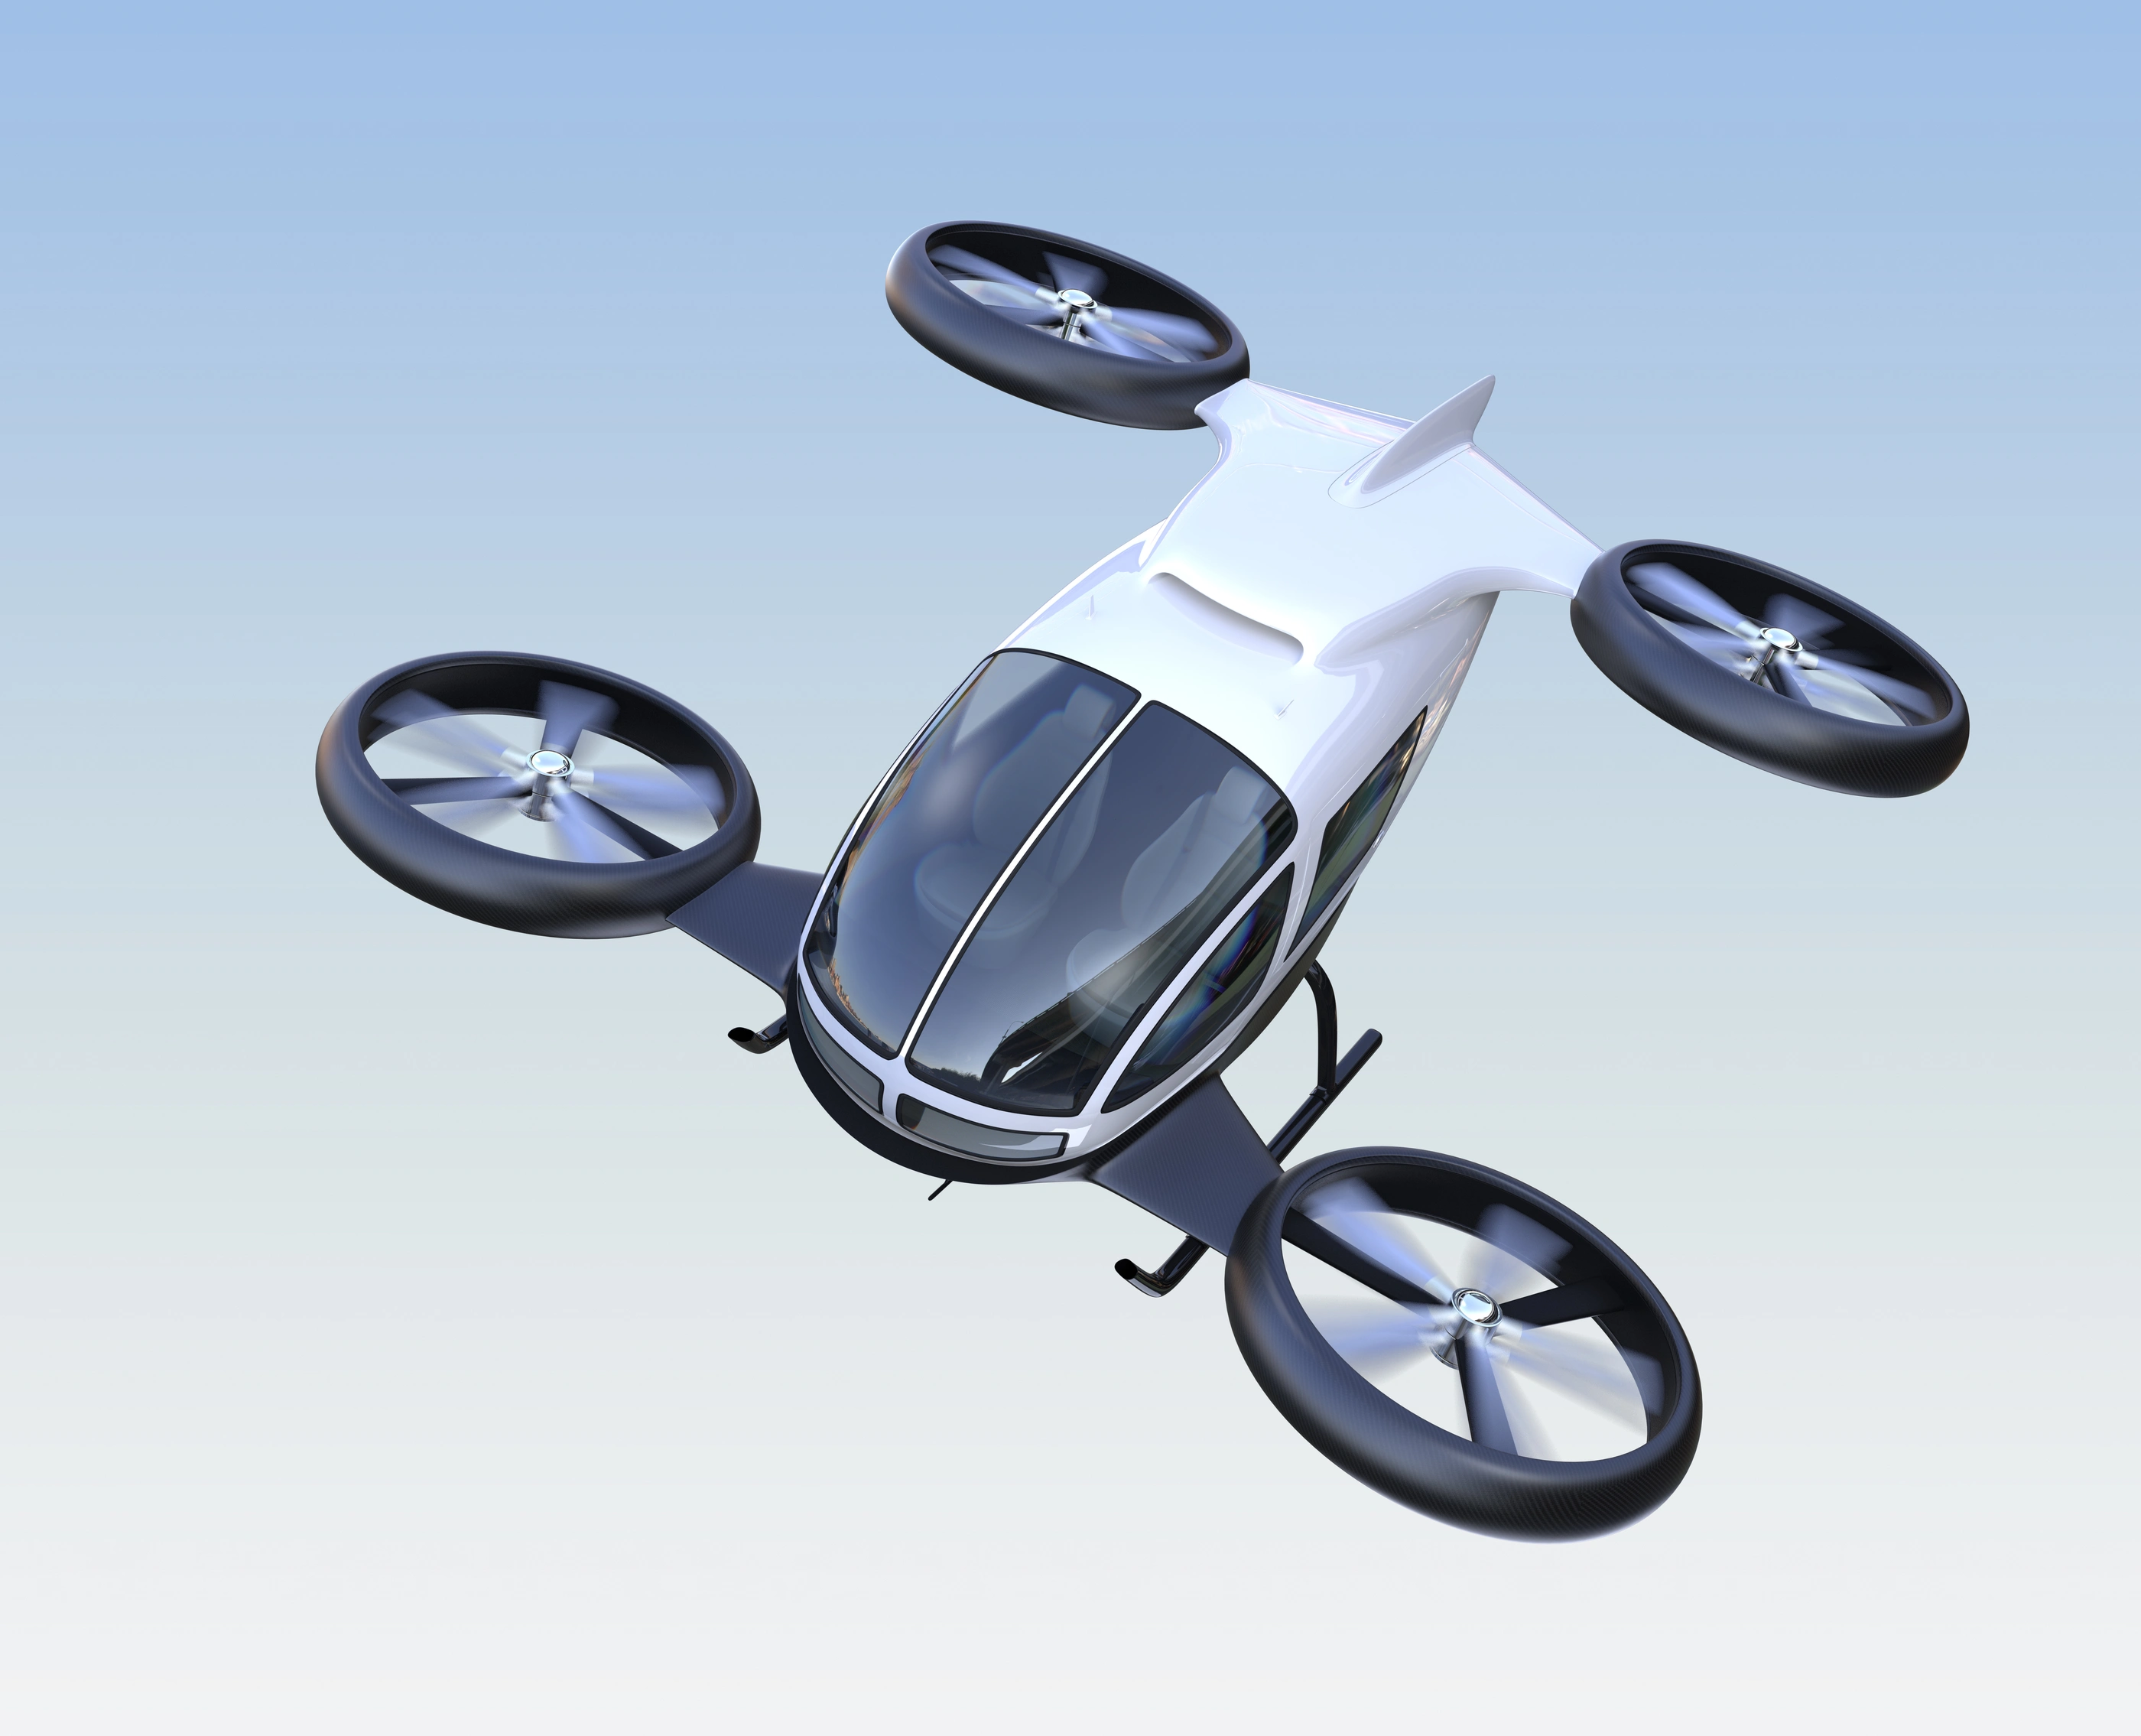 Front view of self-driving passenger drone flying in the sky. 3D rendering image. Original design.